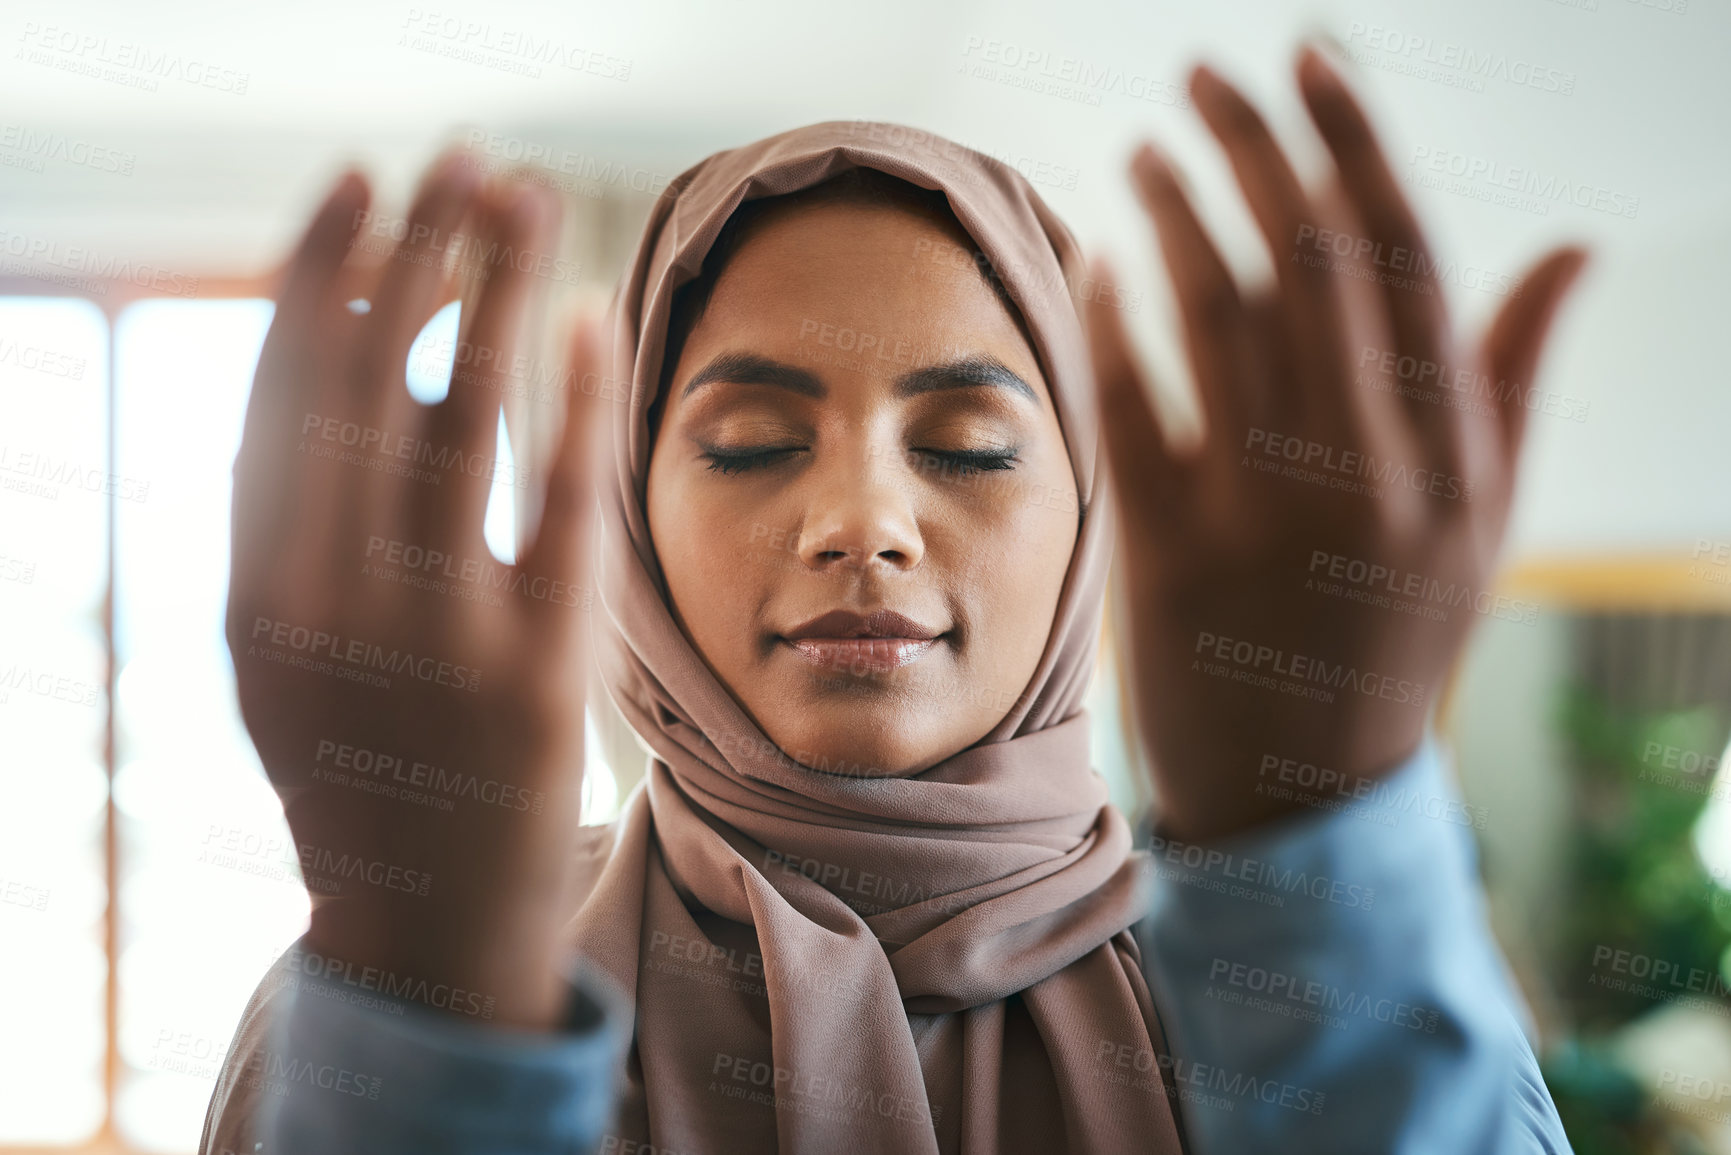 Buy stock photo Shot of a young muslim woman praying in the lounge at home